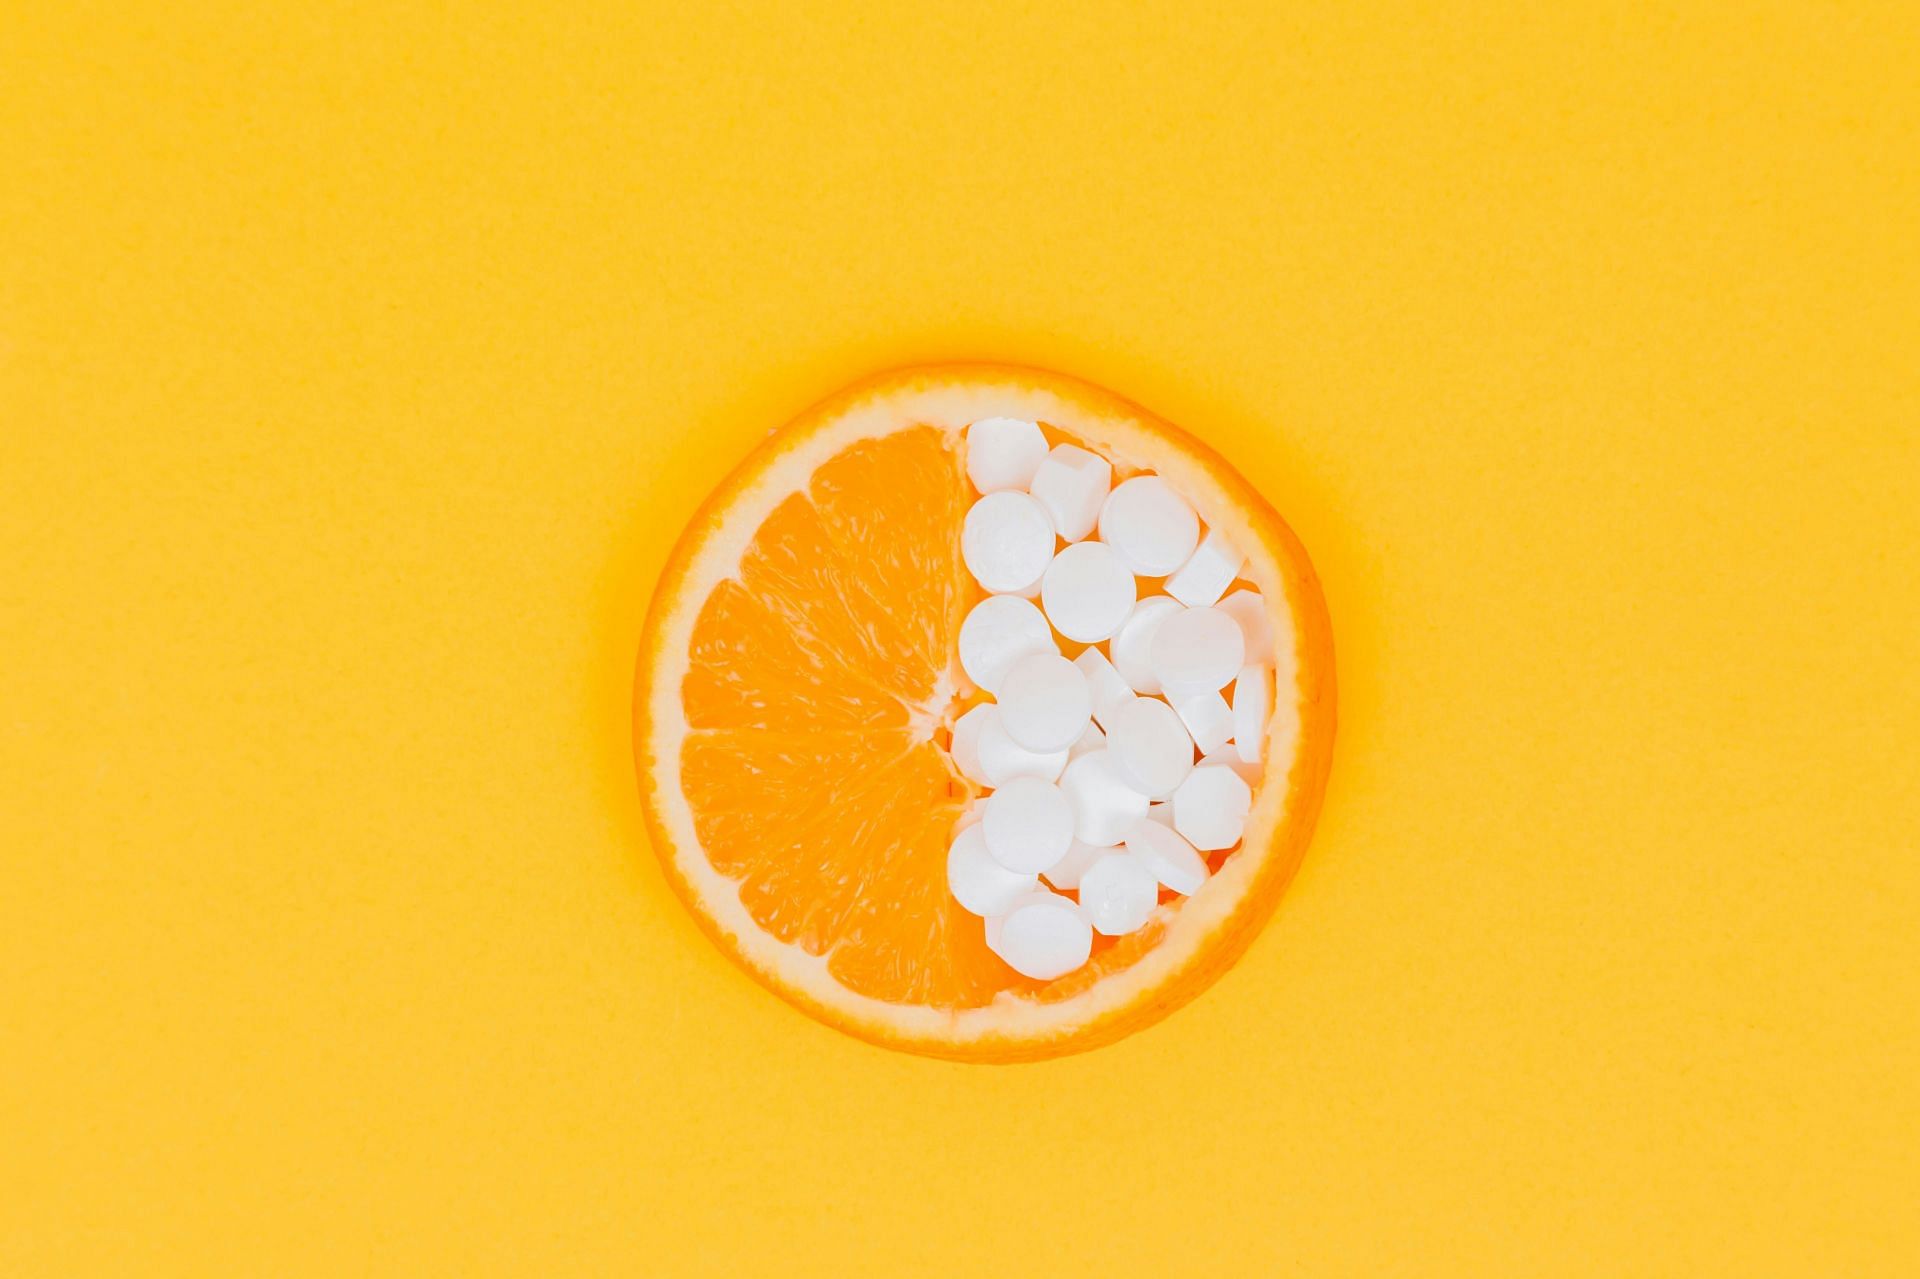 Reverse aging with your daily dose of Vitamin C (Image by Diana Polekhina/Unsplash)